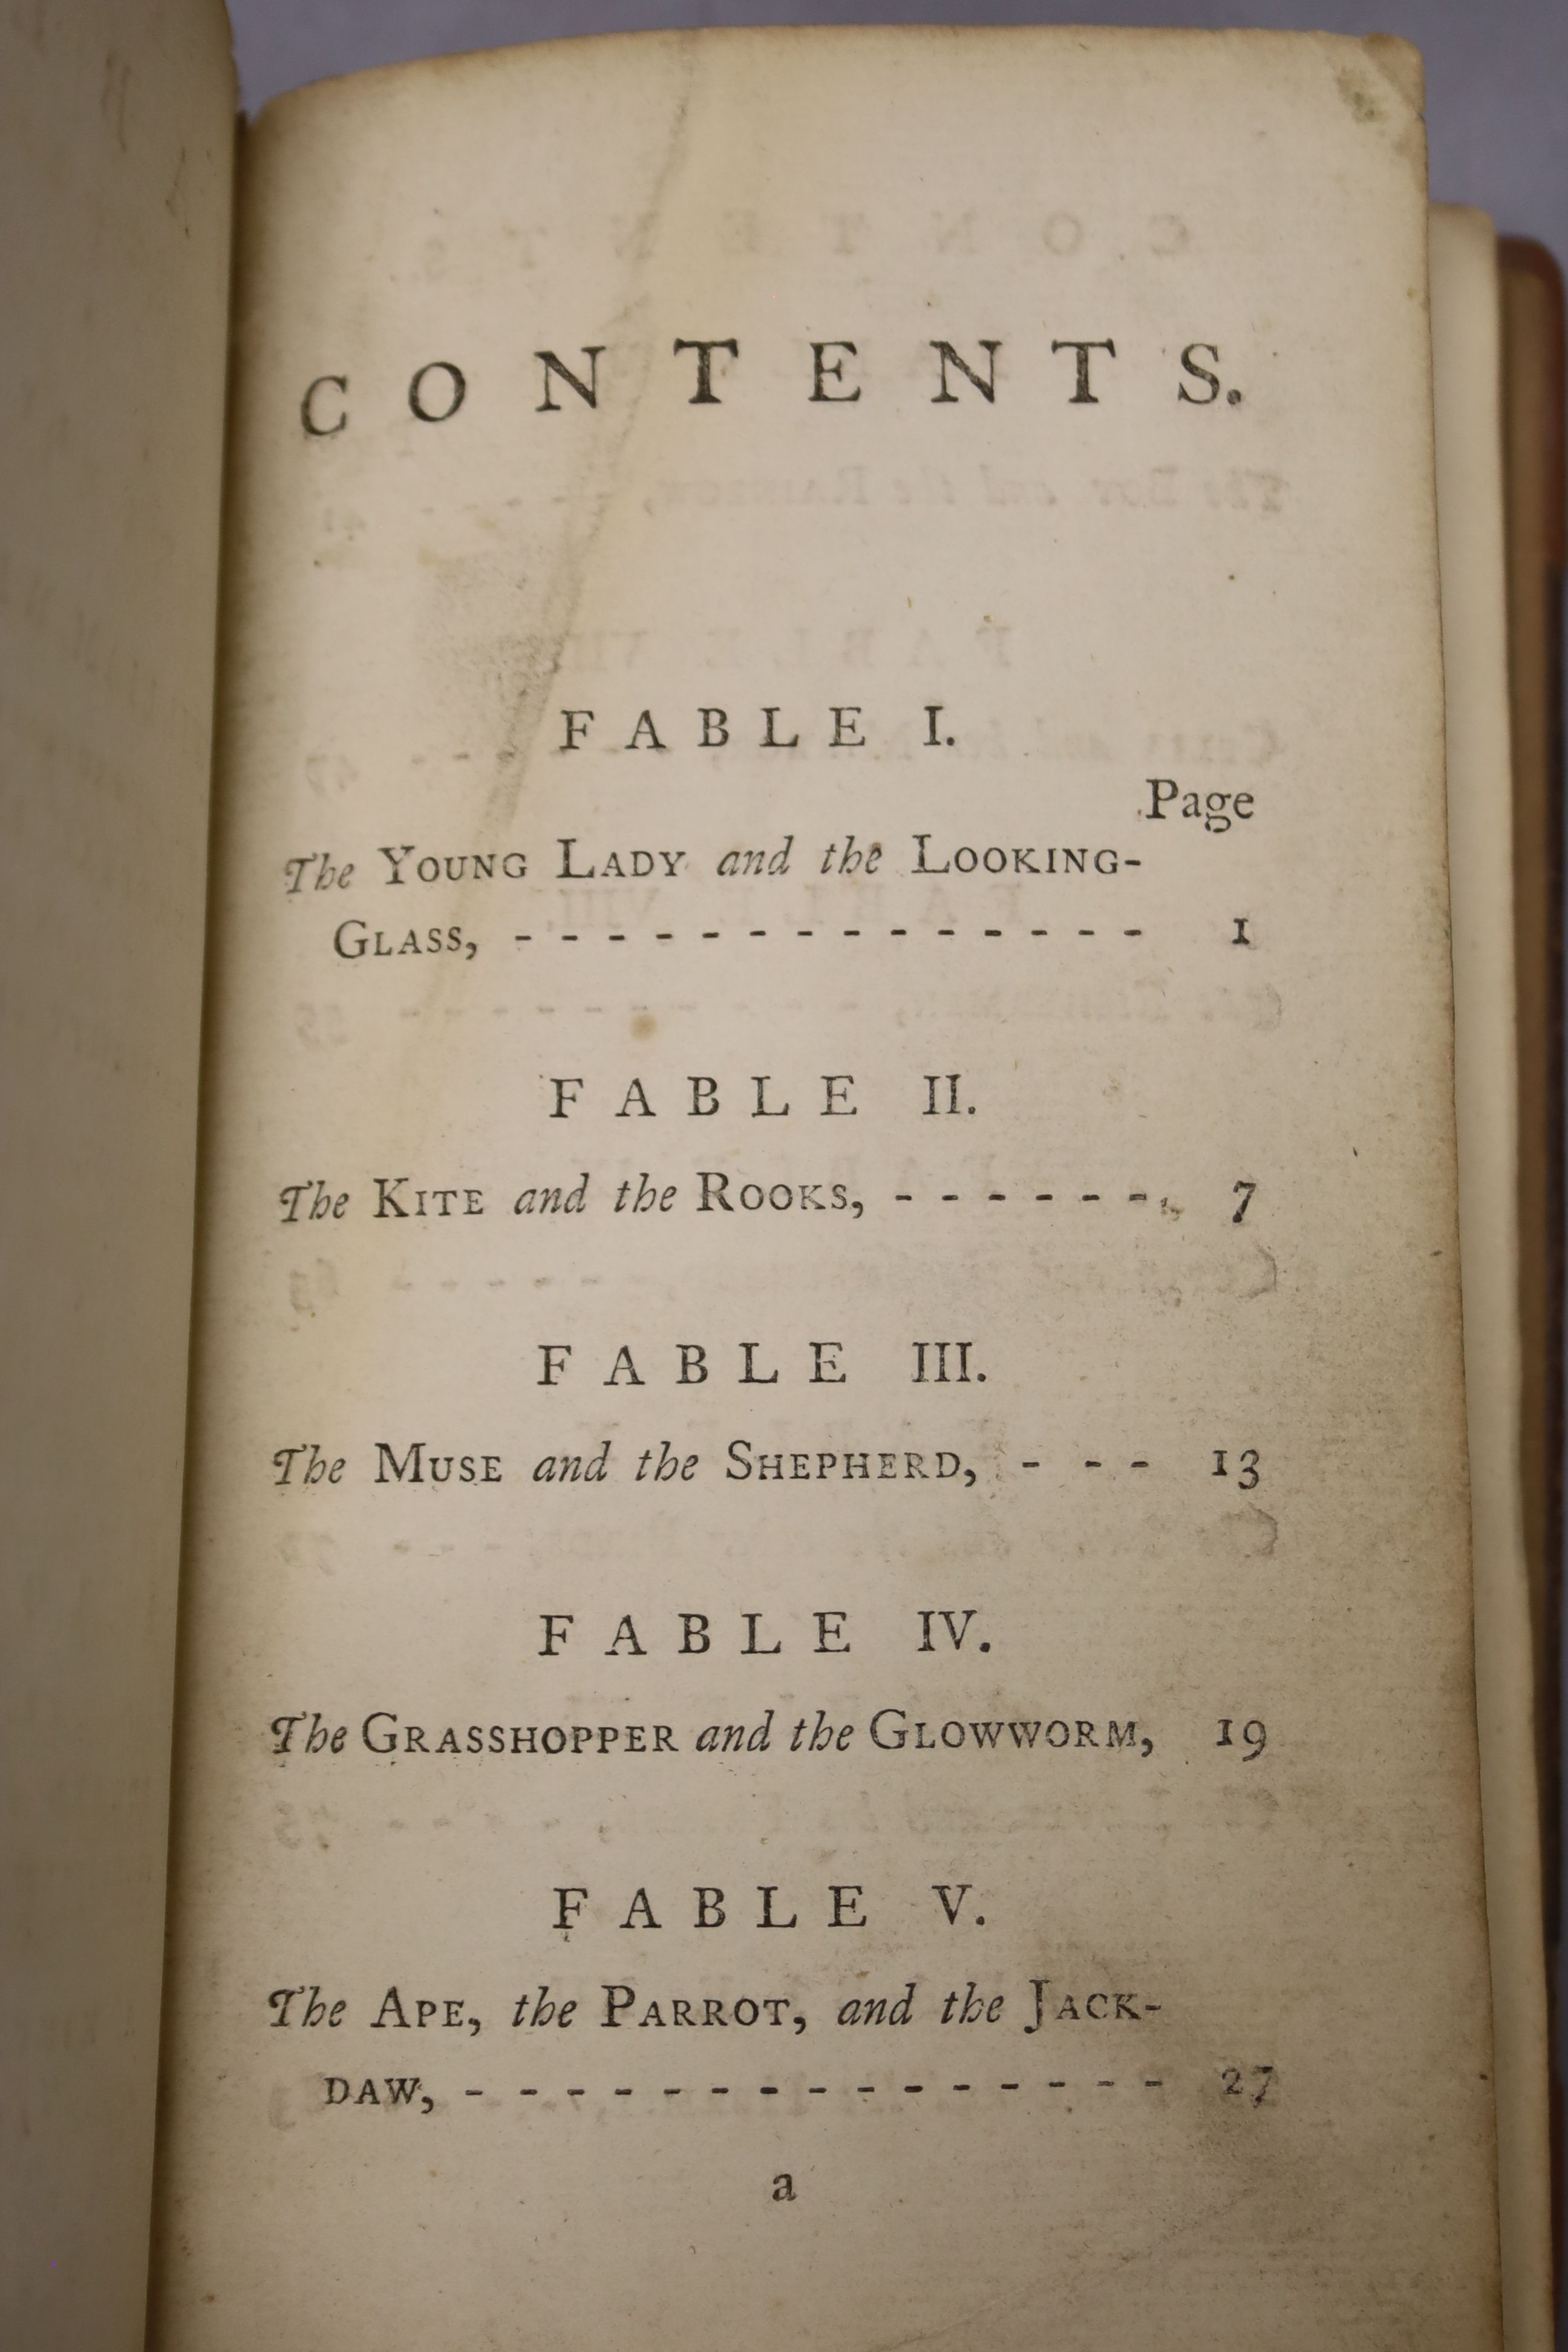 Wilkie, William - Fables, 8vo, calf, rebacked and re-cornered, with 18 engraved plates, Edward and Charles Dilly, London 1768